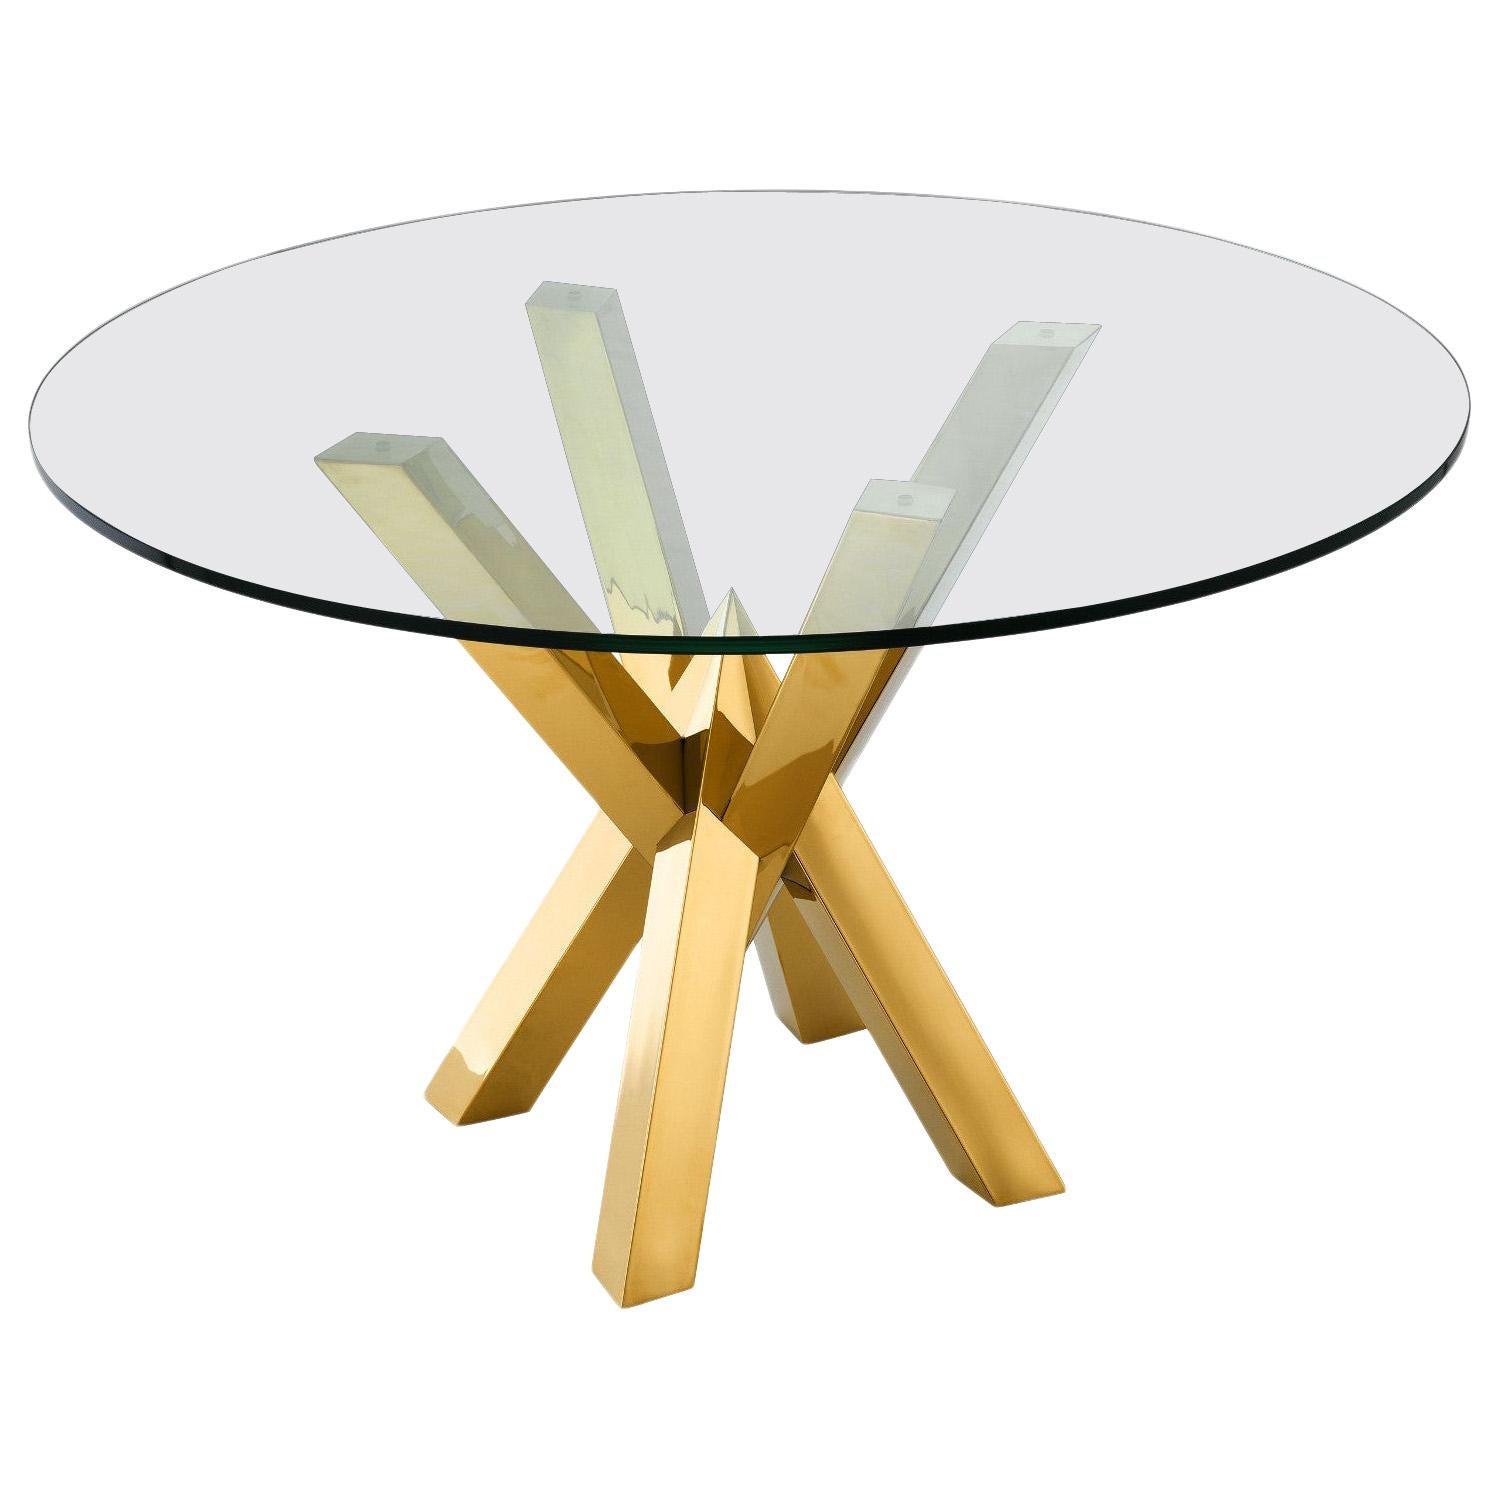 Gilded Stainless Steel and Glass Round Dining Pedestal Table